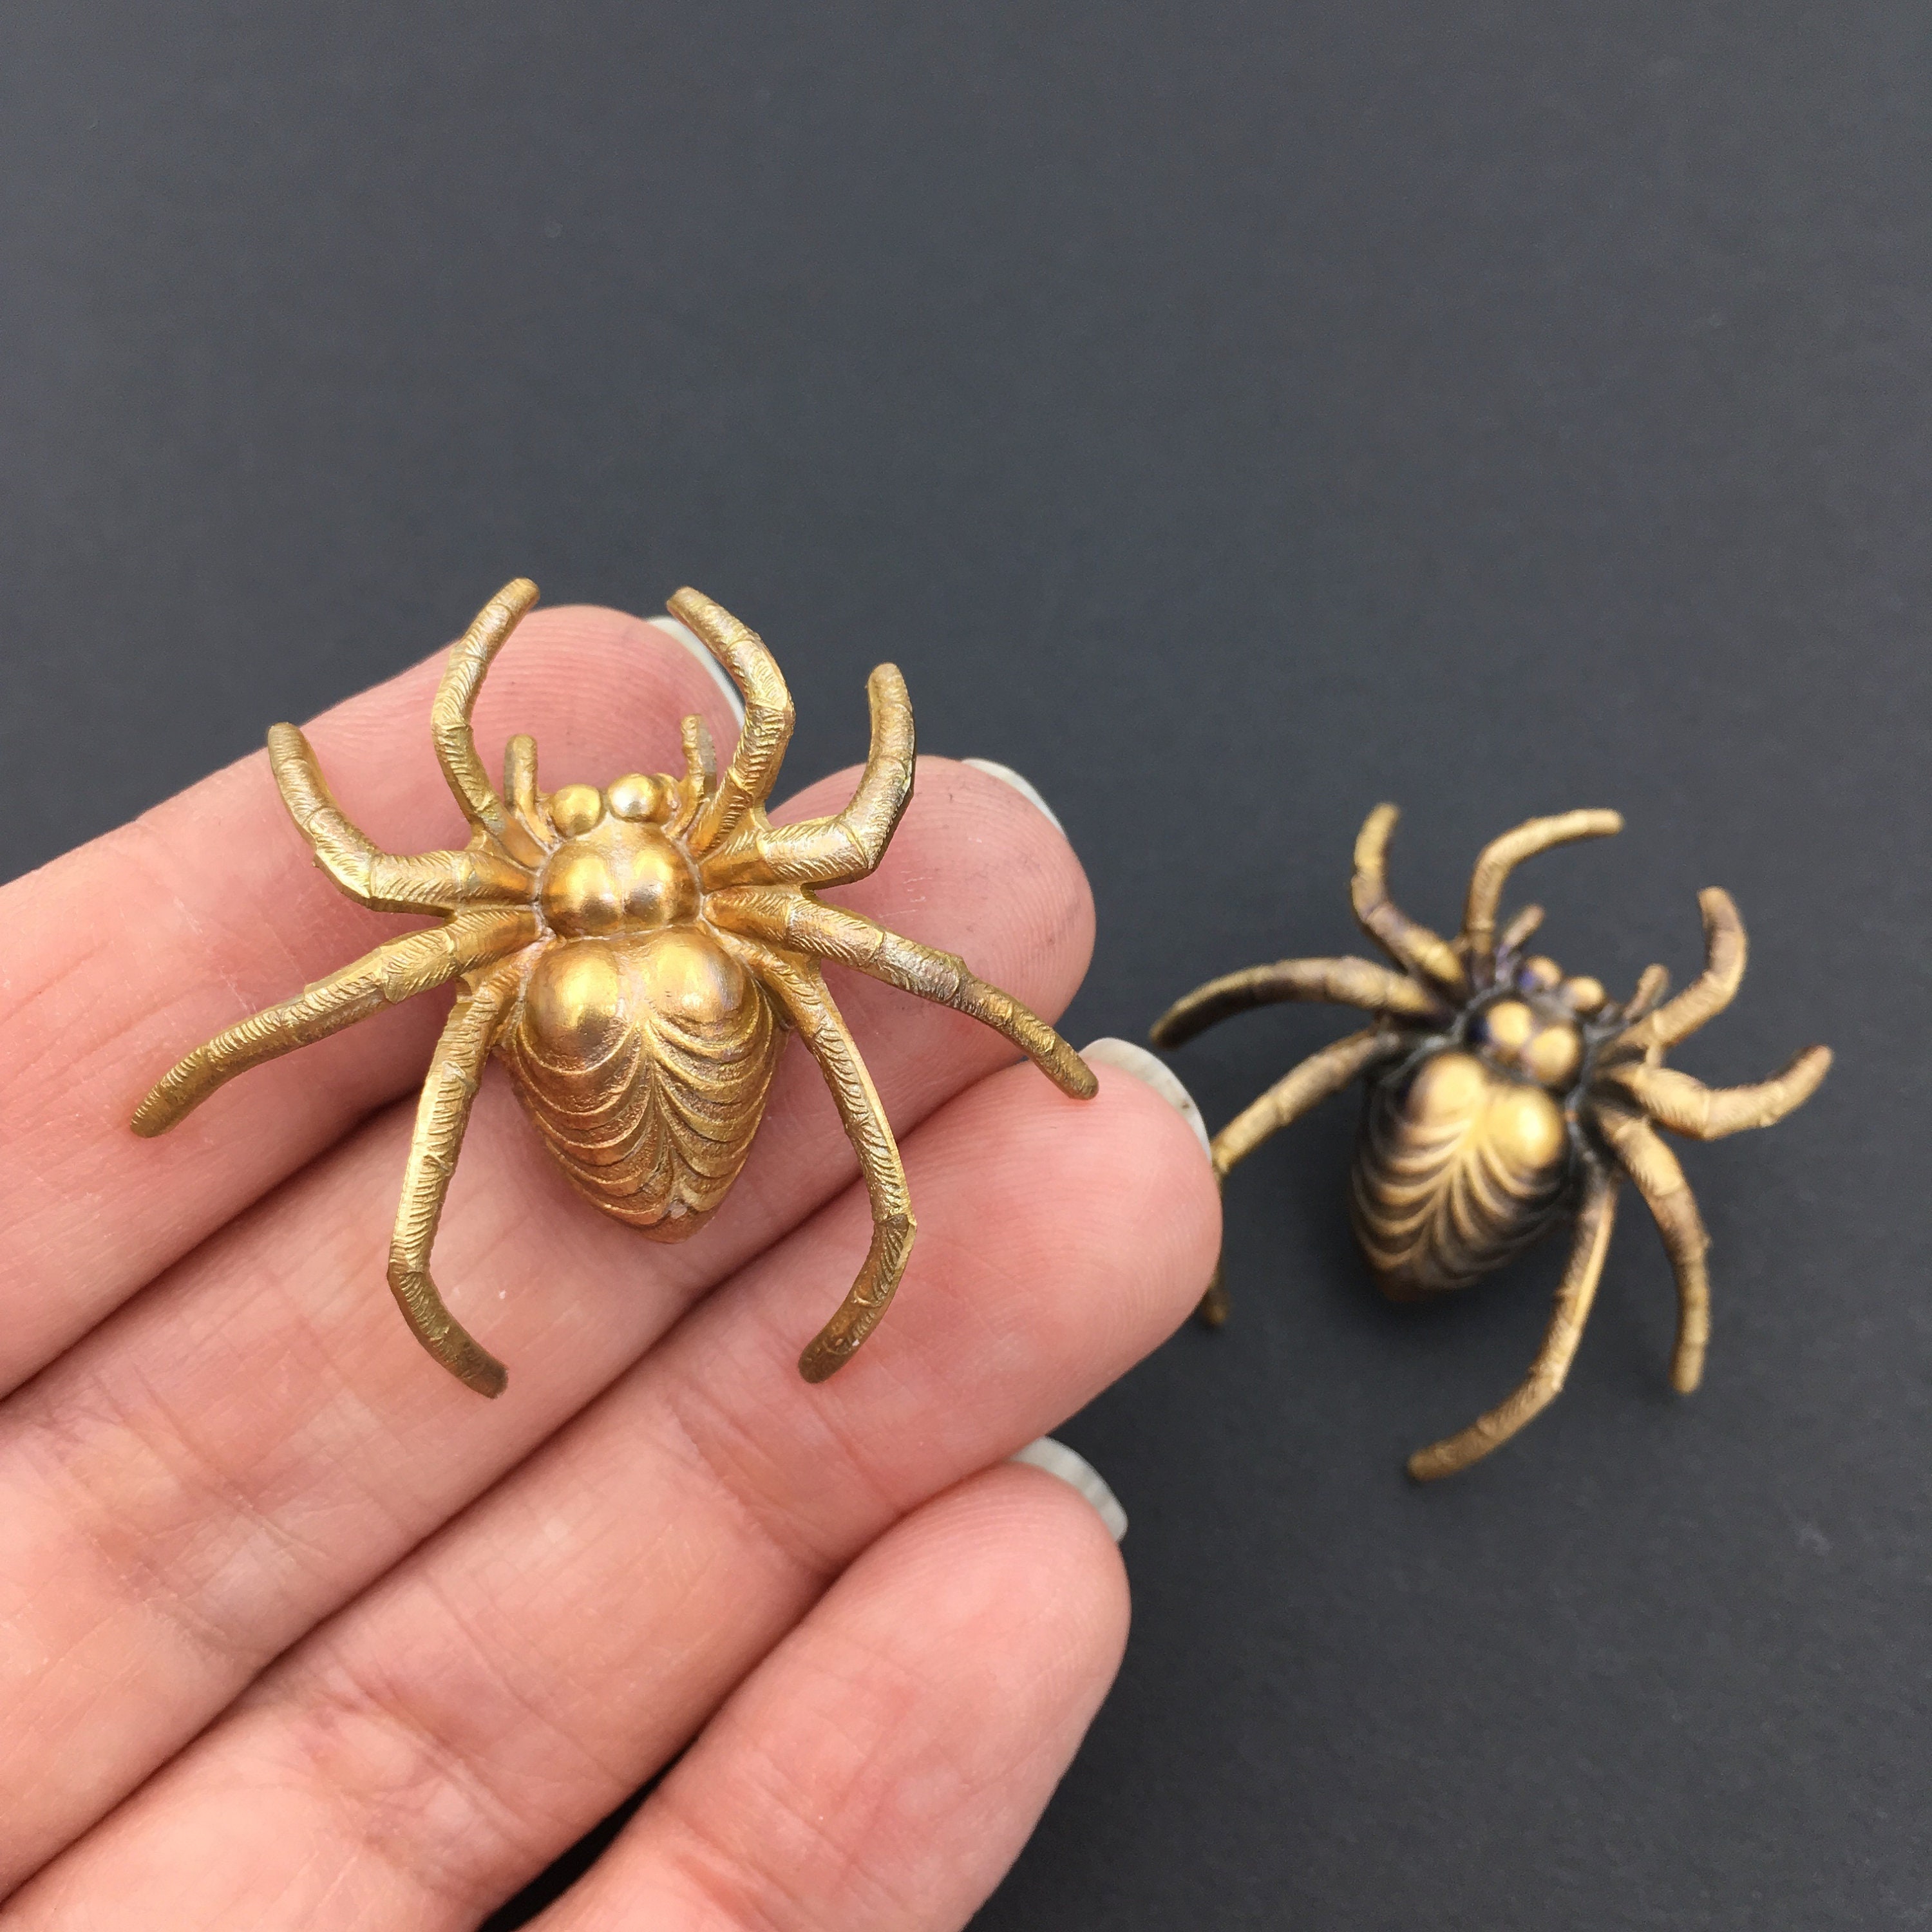 Spider Pin Bug Pin Spider Jewelry Spider Jewellery Spider | Etsy